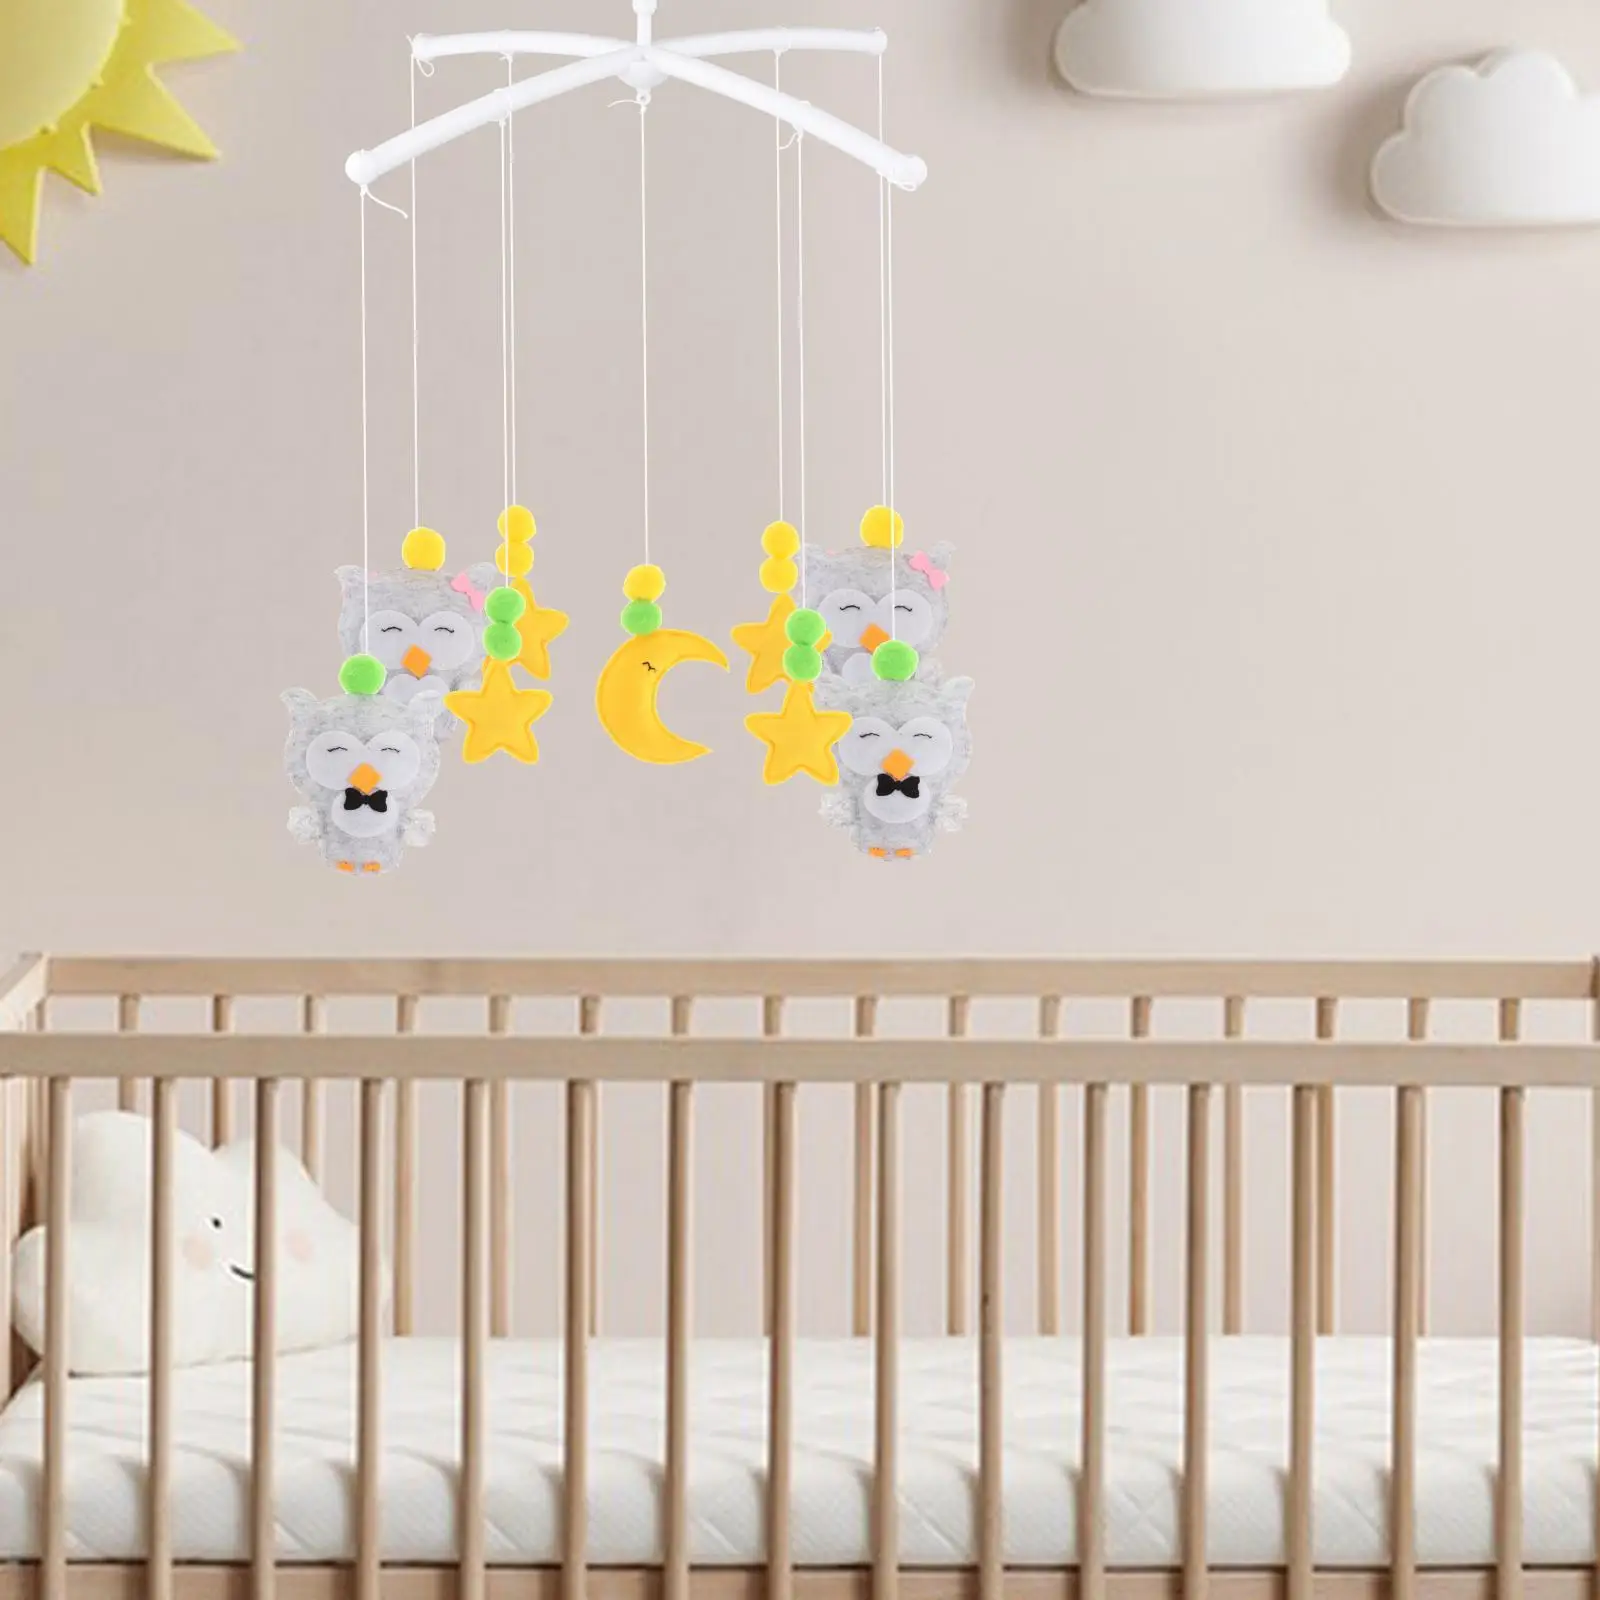 Crib Hanging Toys Toy Creative Sensory Toy Interactive Crib Mobiles decor Rattle Toy for Holiday Party Bedroom Crib